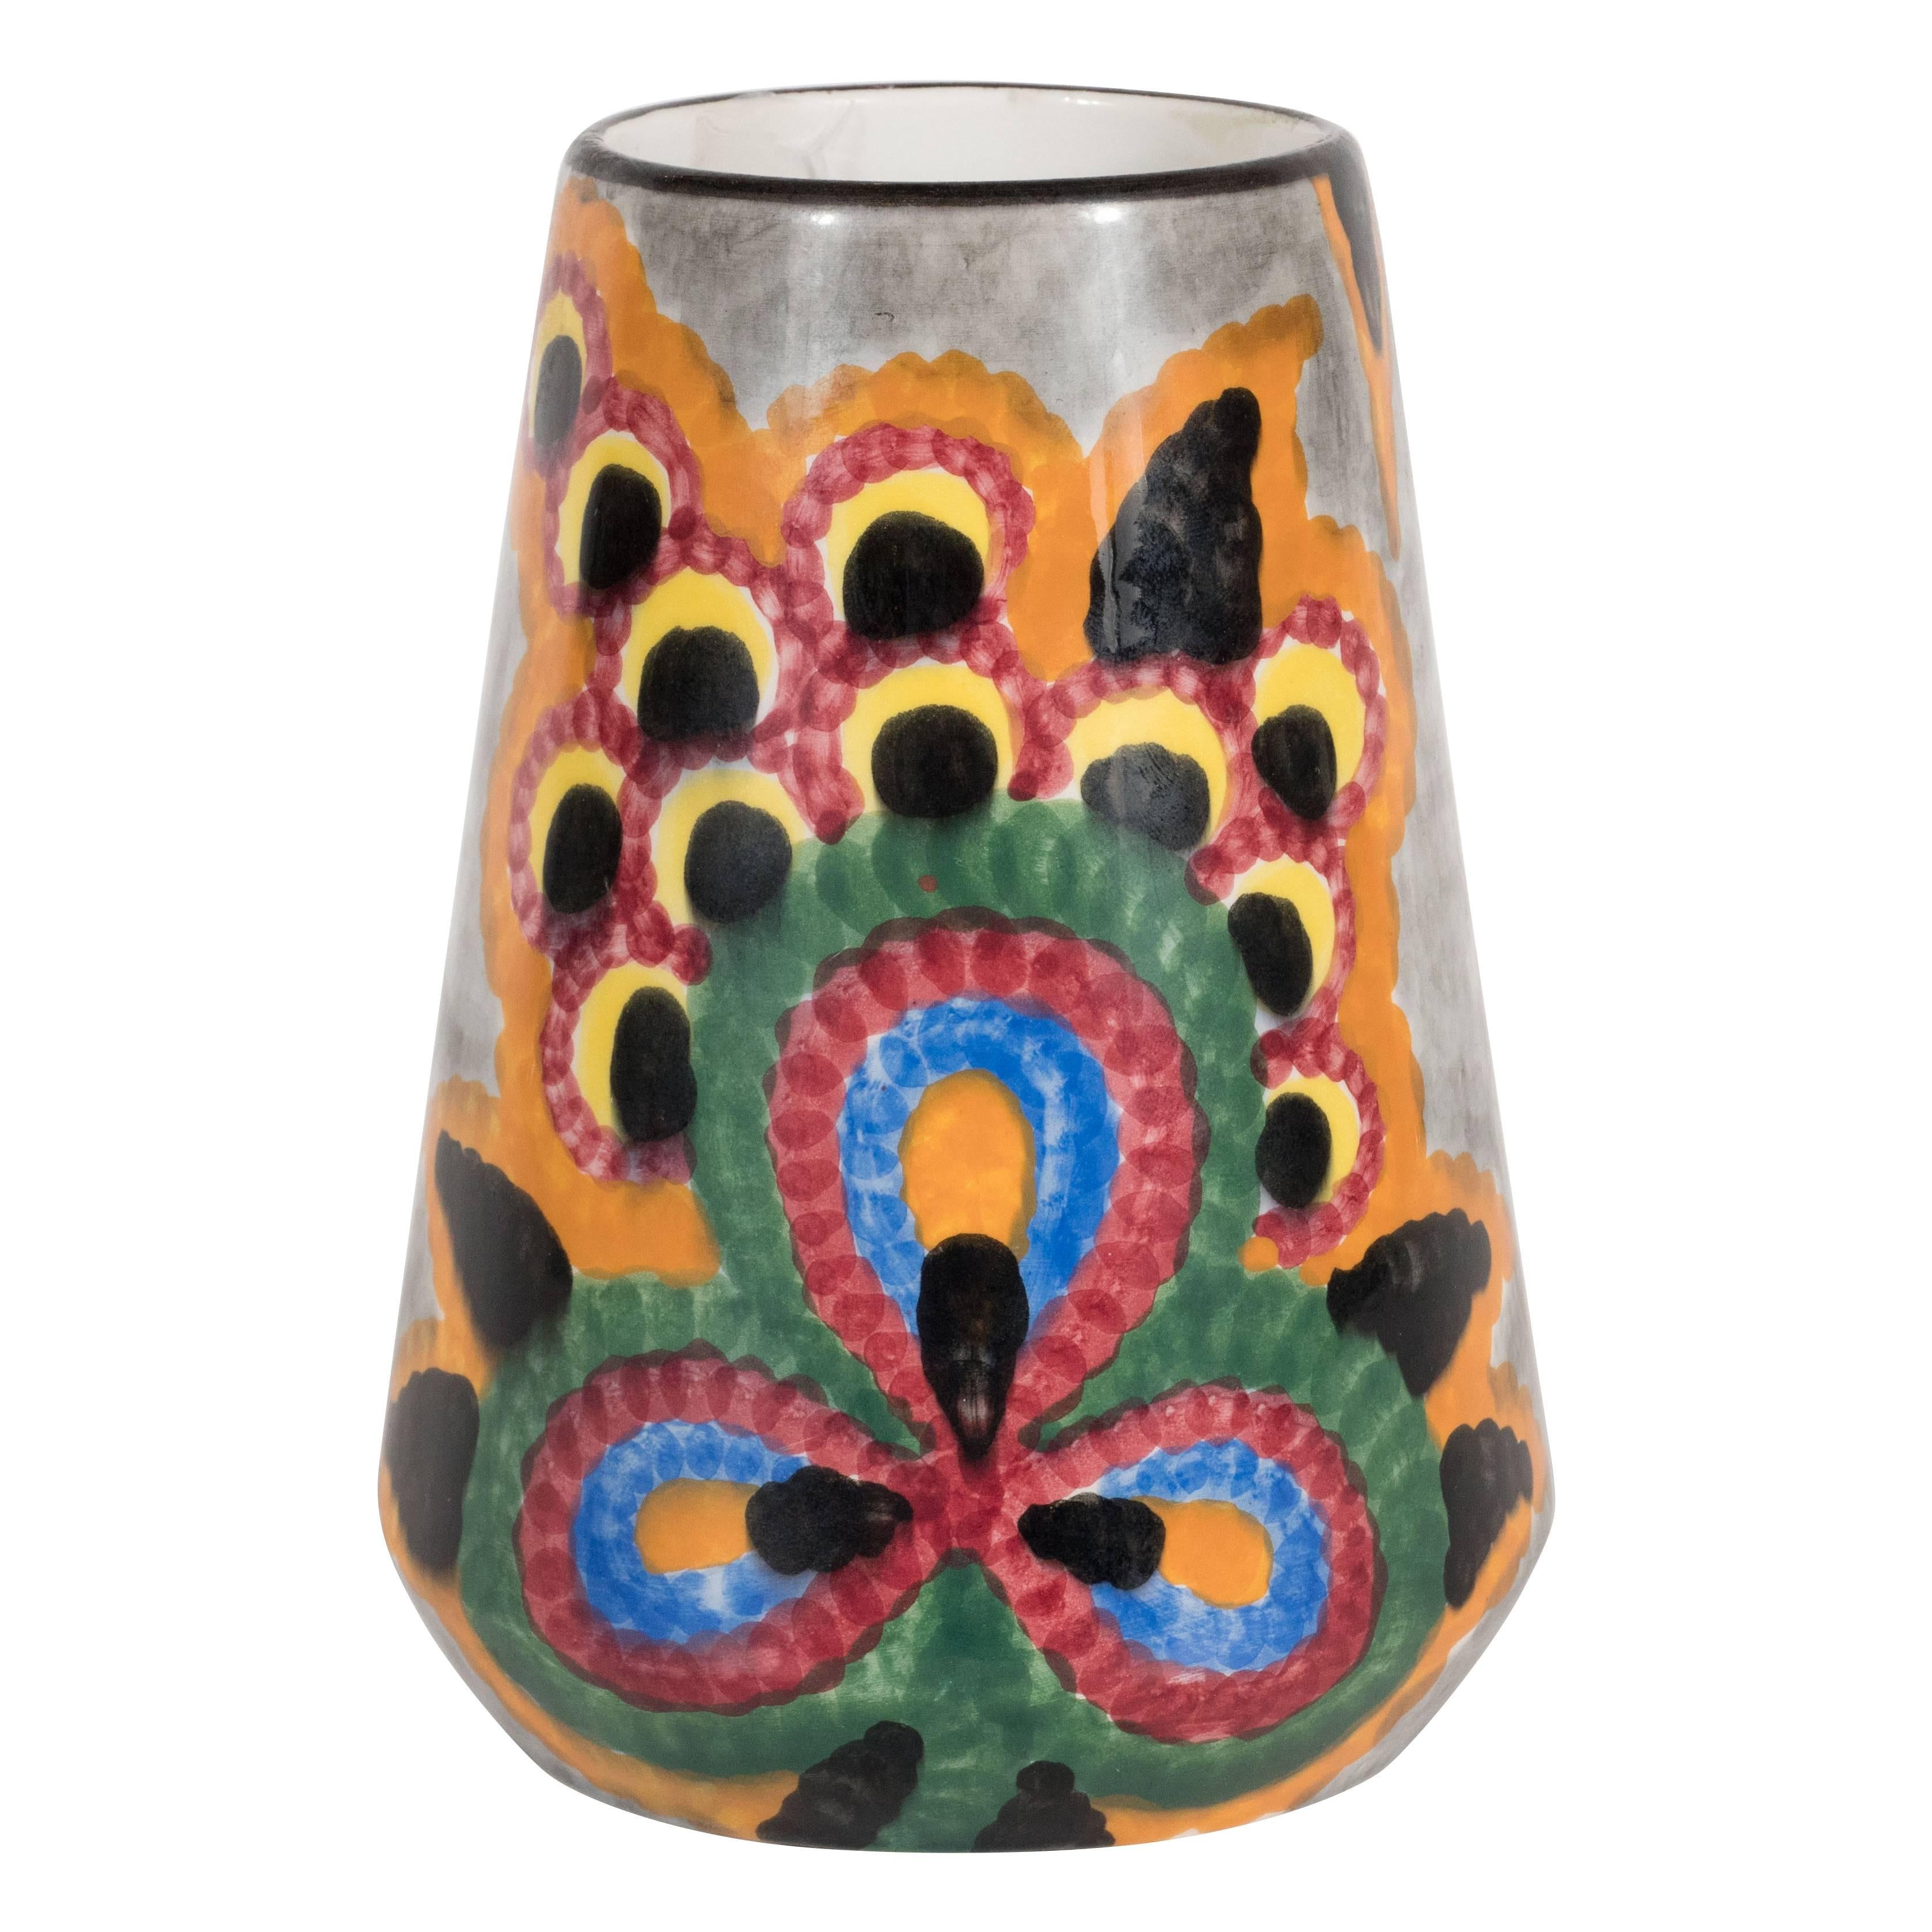 Art Deco Hand-Painted Schramberg SMF Vase with Vibrant Abstract Patterns